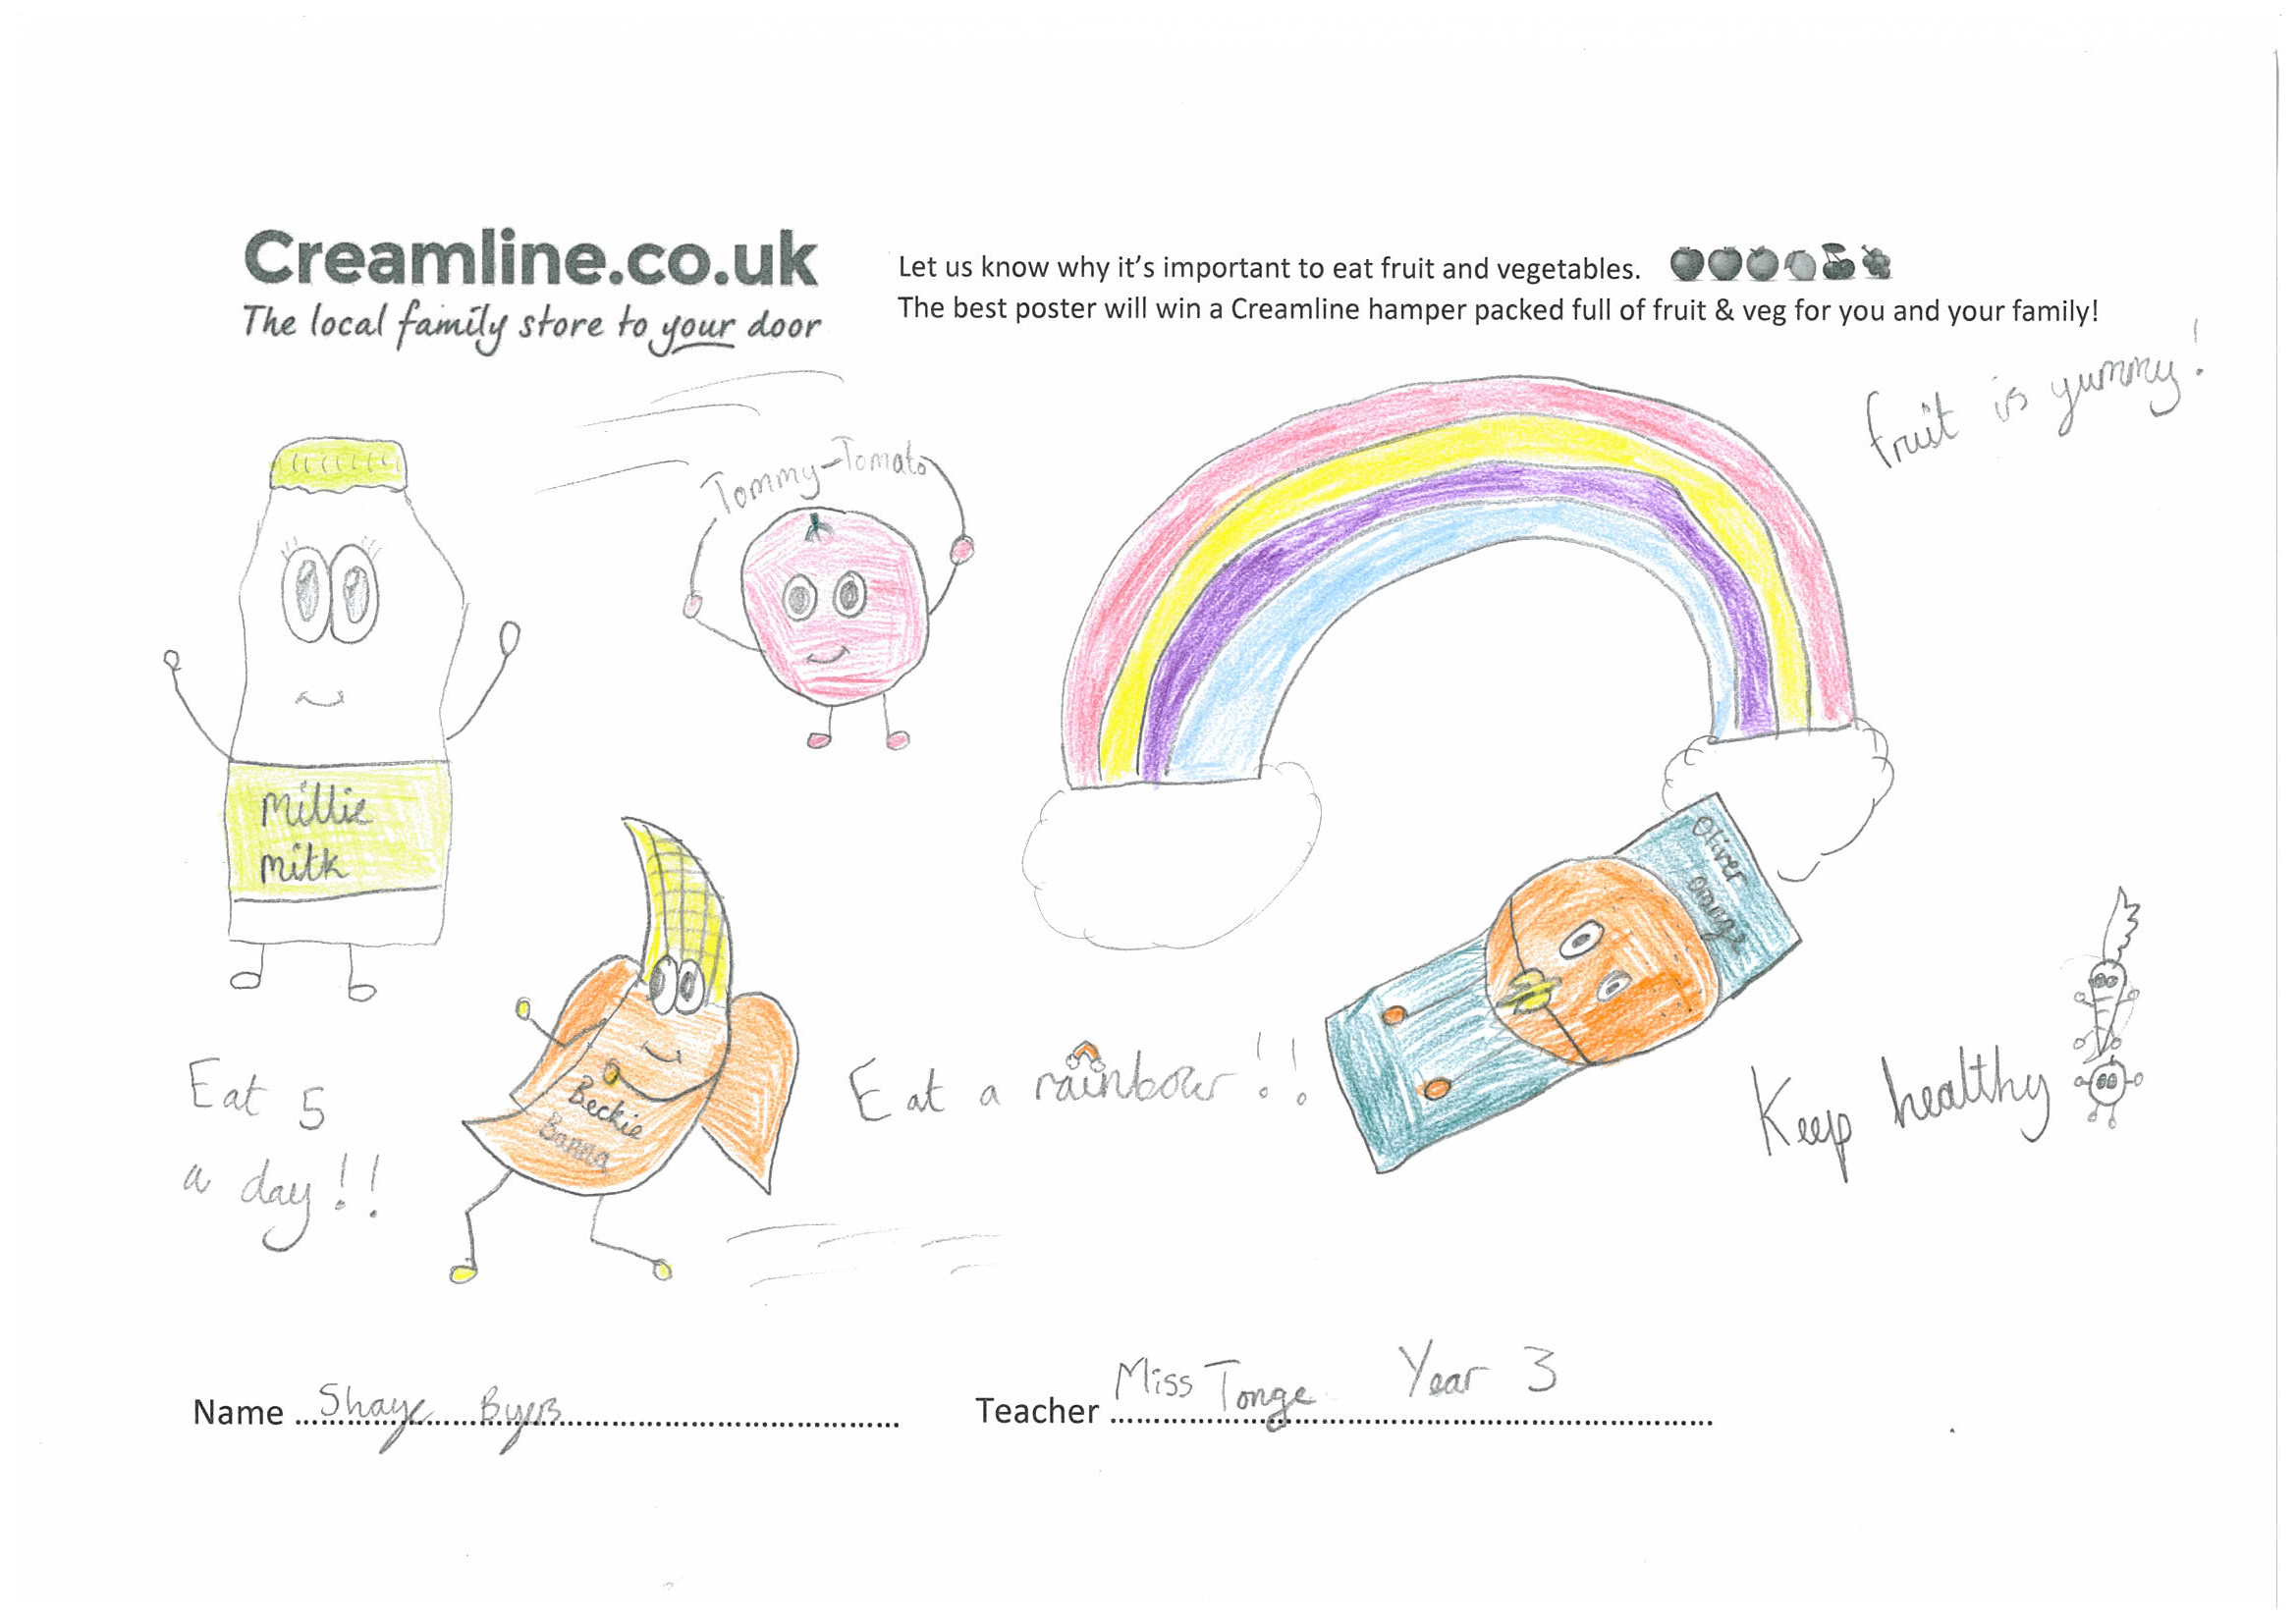 Entry from Shayne Byers , Newchurch Primary